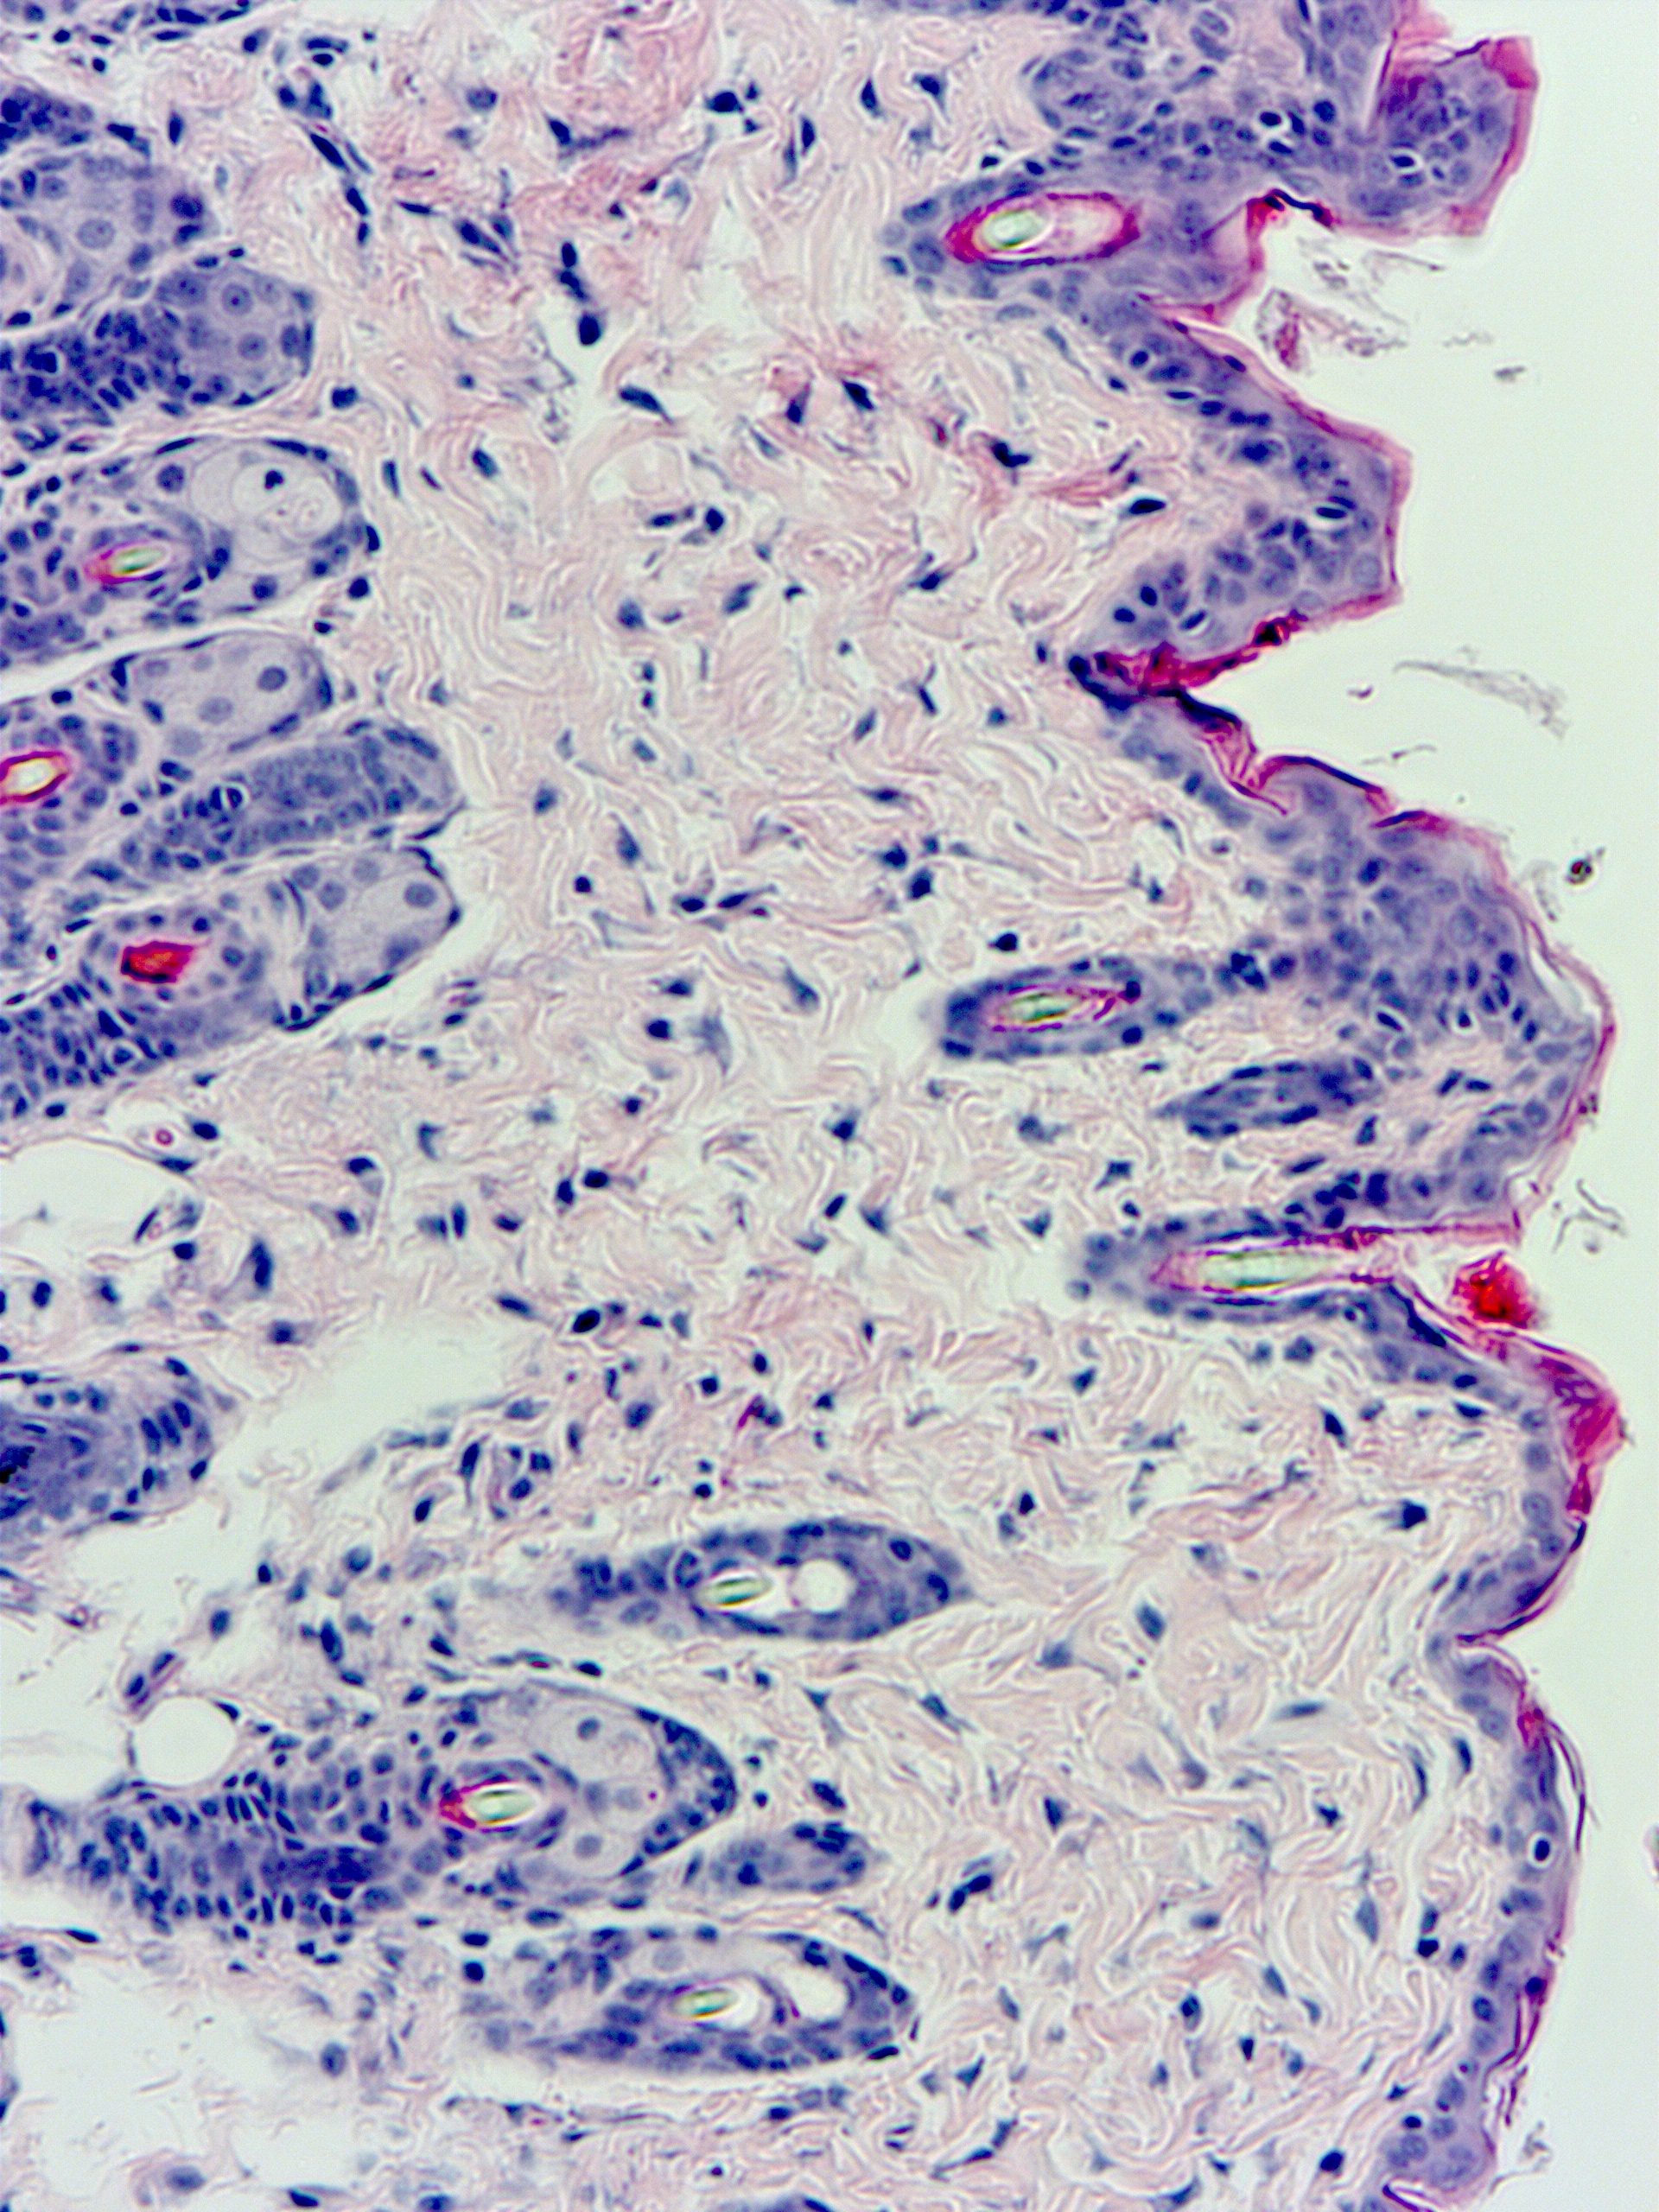 The different tissue layers of the skin cross section in the image are stained different colours. The epidermis is dark purple, while the layer immediately beneath it (the dermis) is light pink.